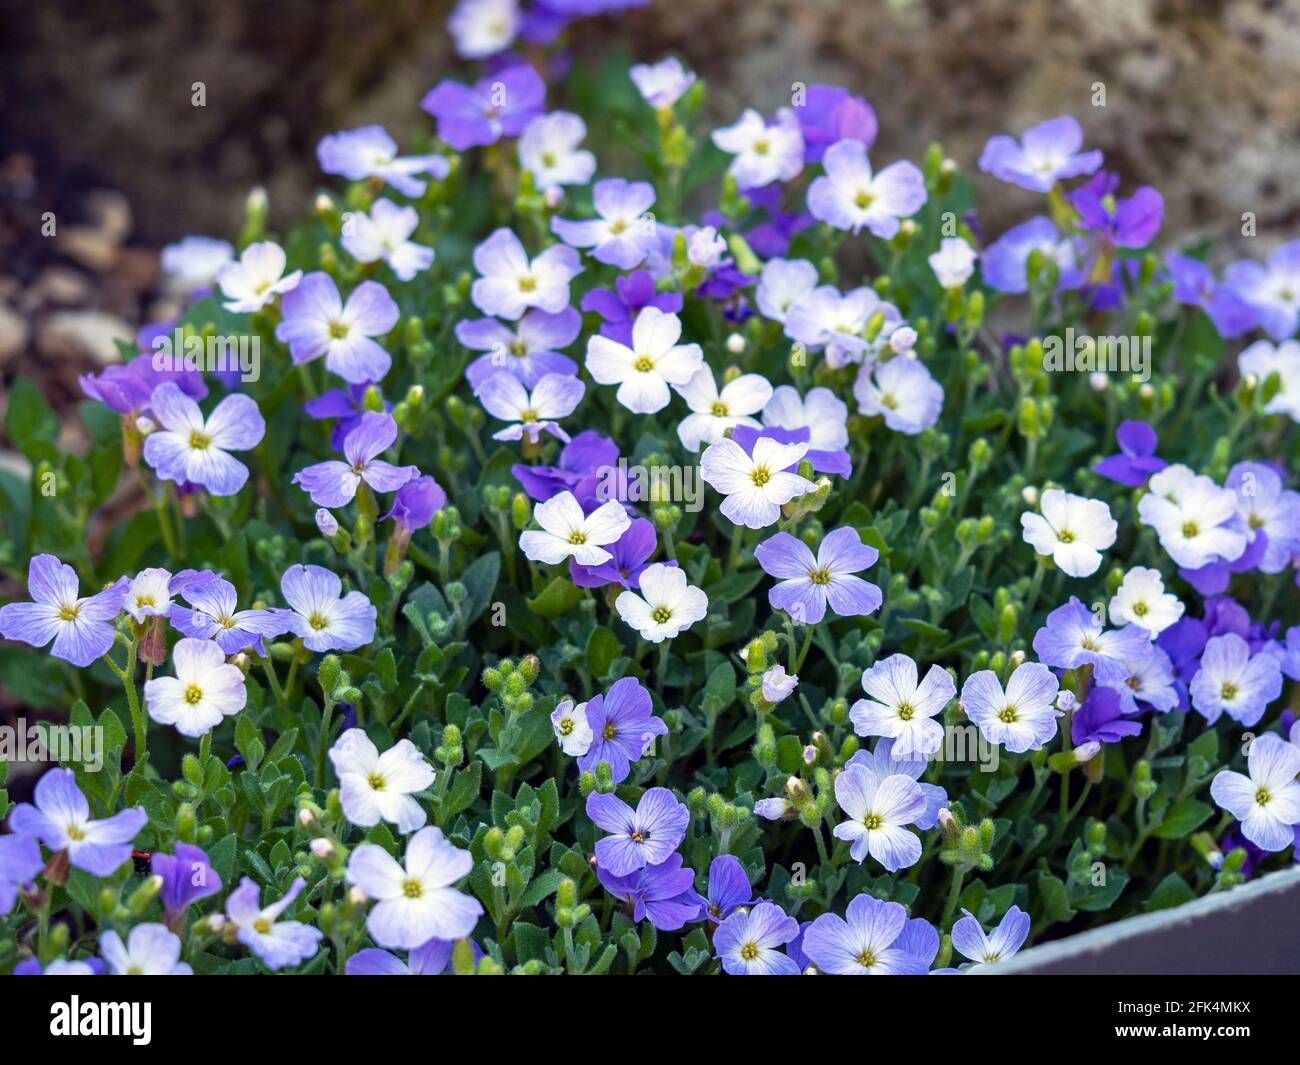 Blue and white Aubrieta flowers in a garden Stock Photo